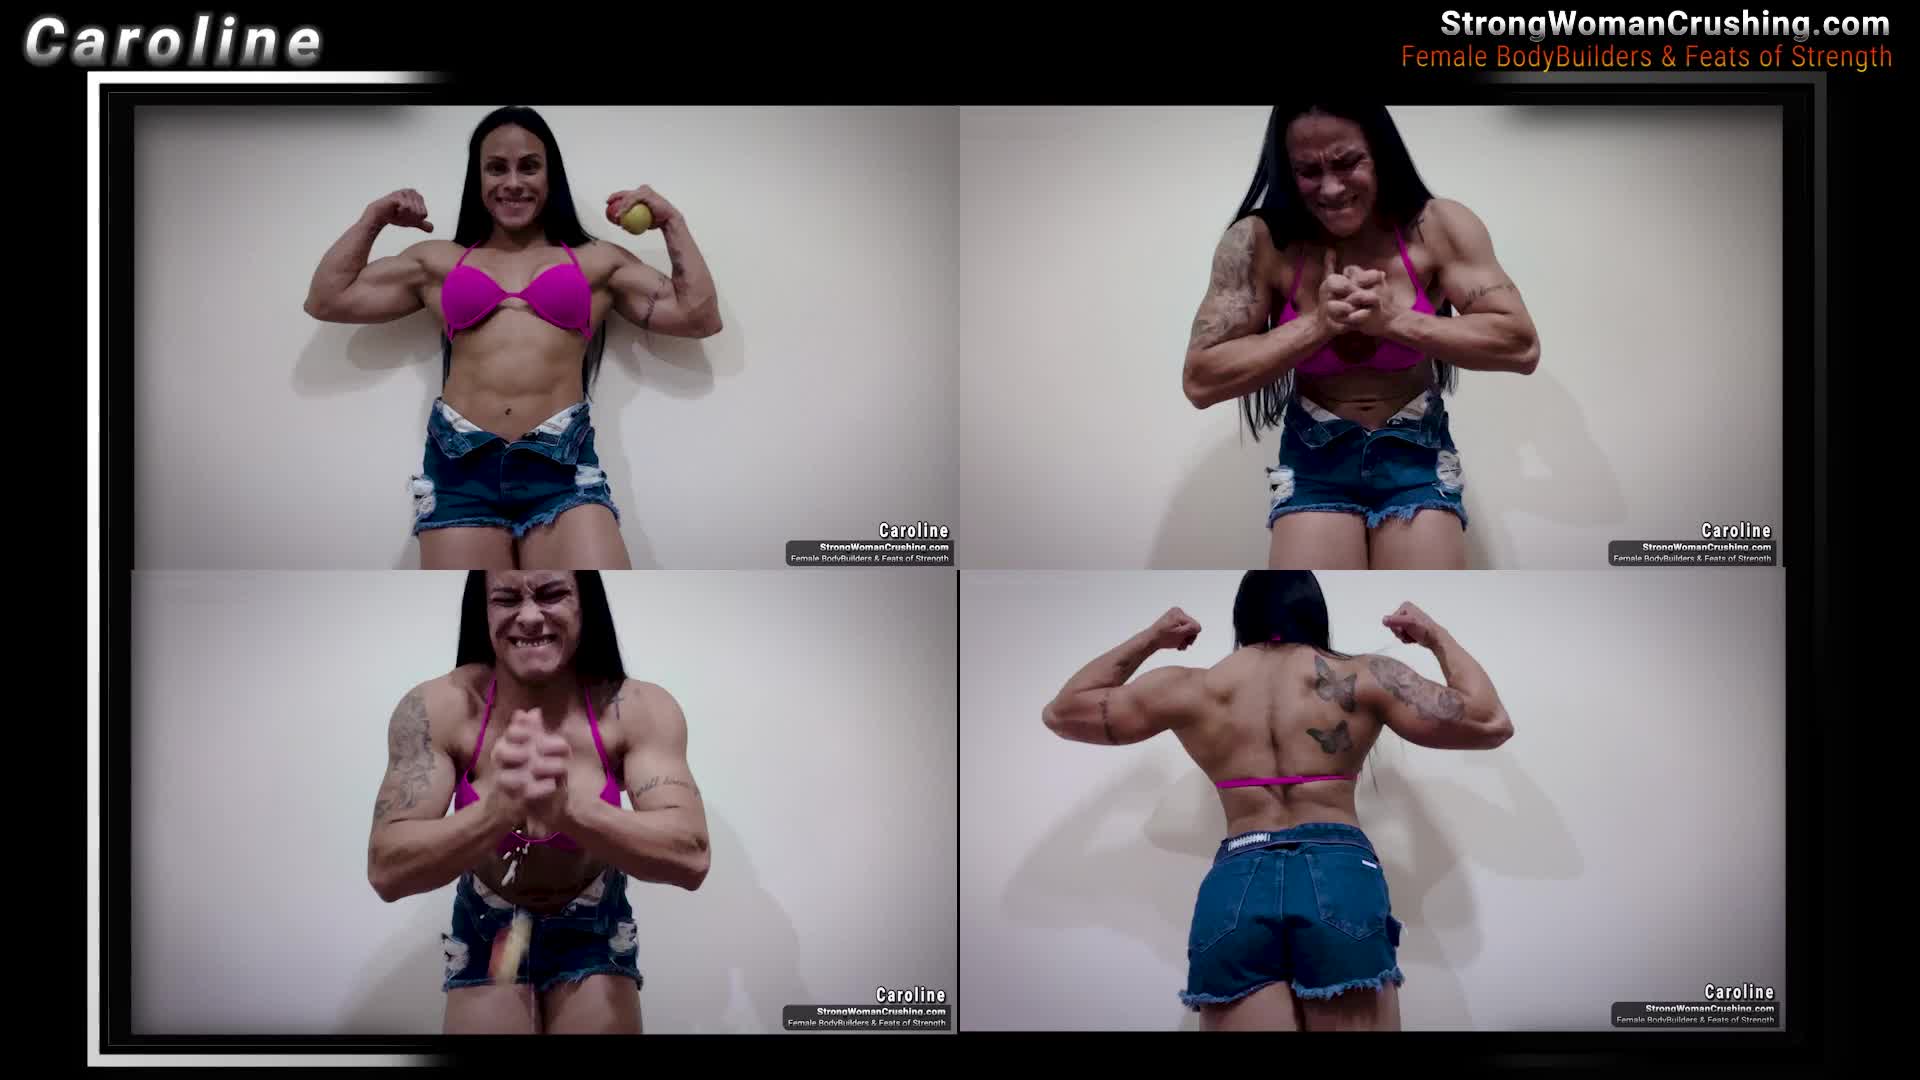 Caroline Jaw-Dropping Display of Muscular Might as She Obliterates Apples